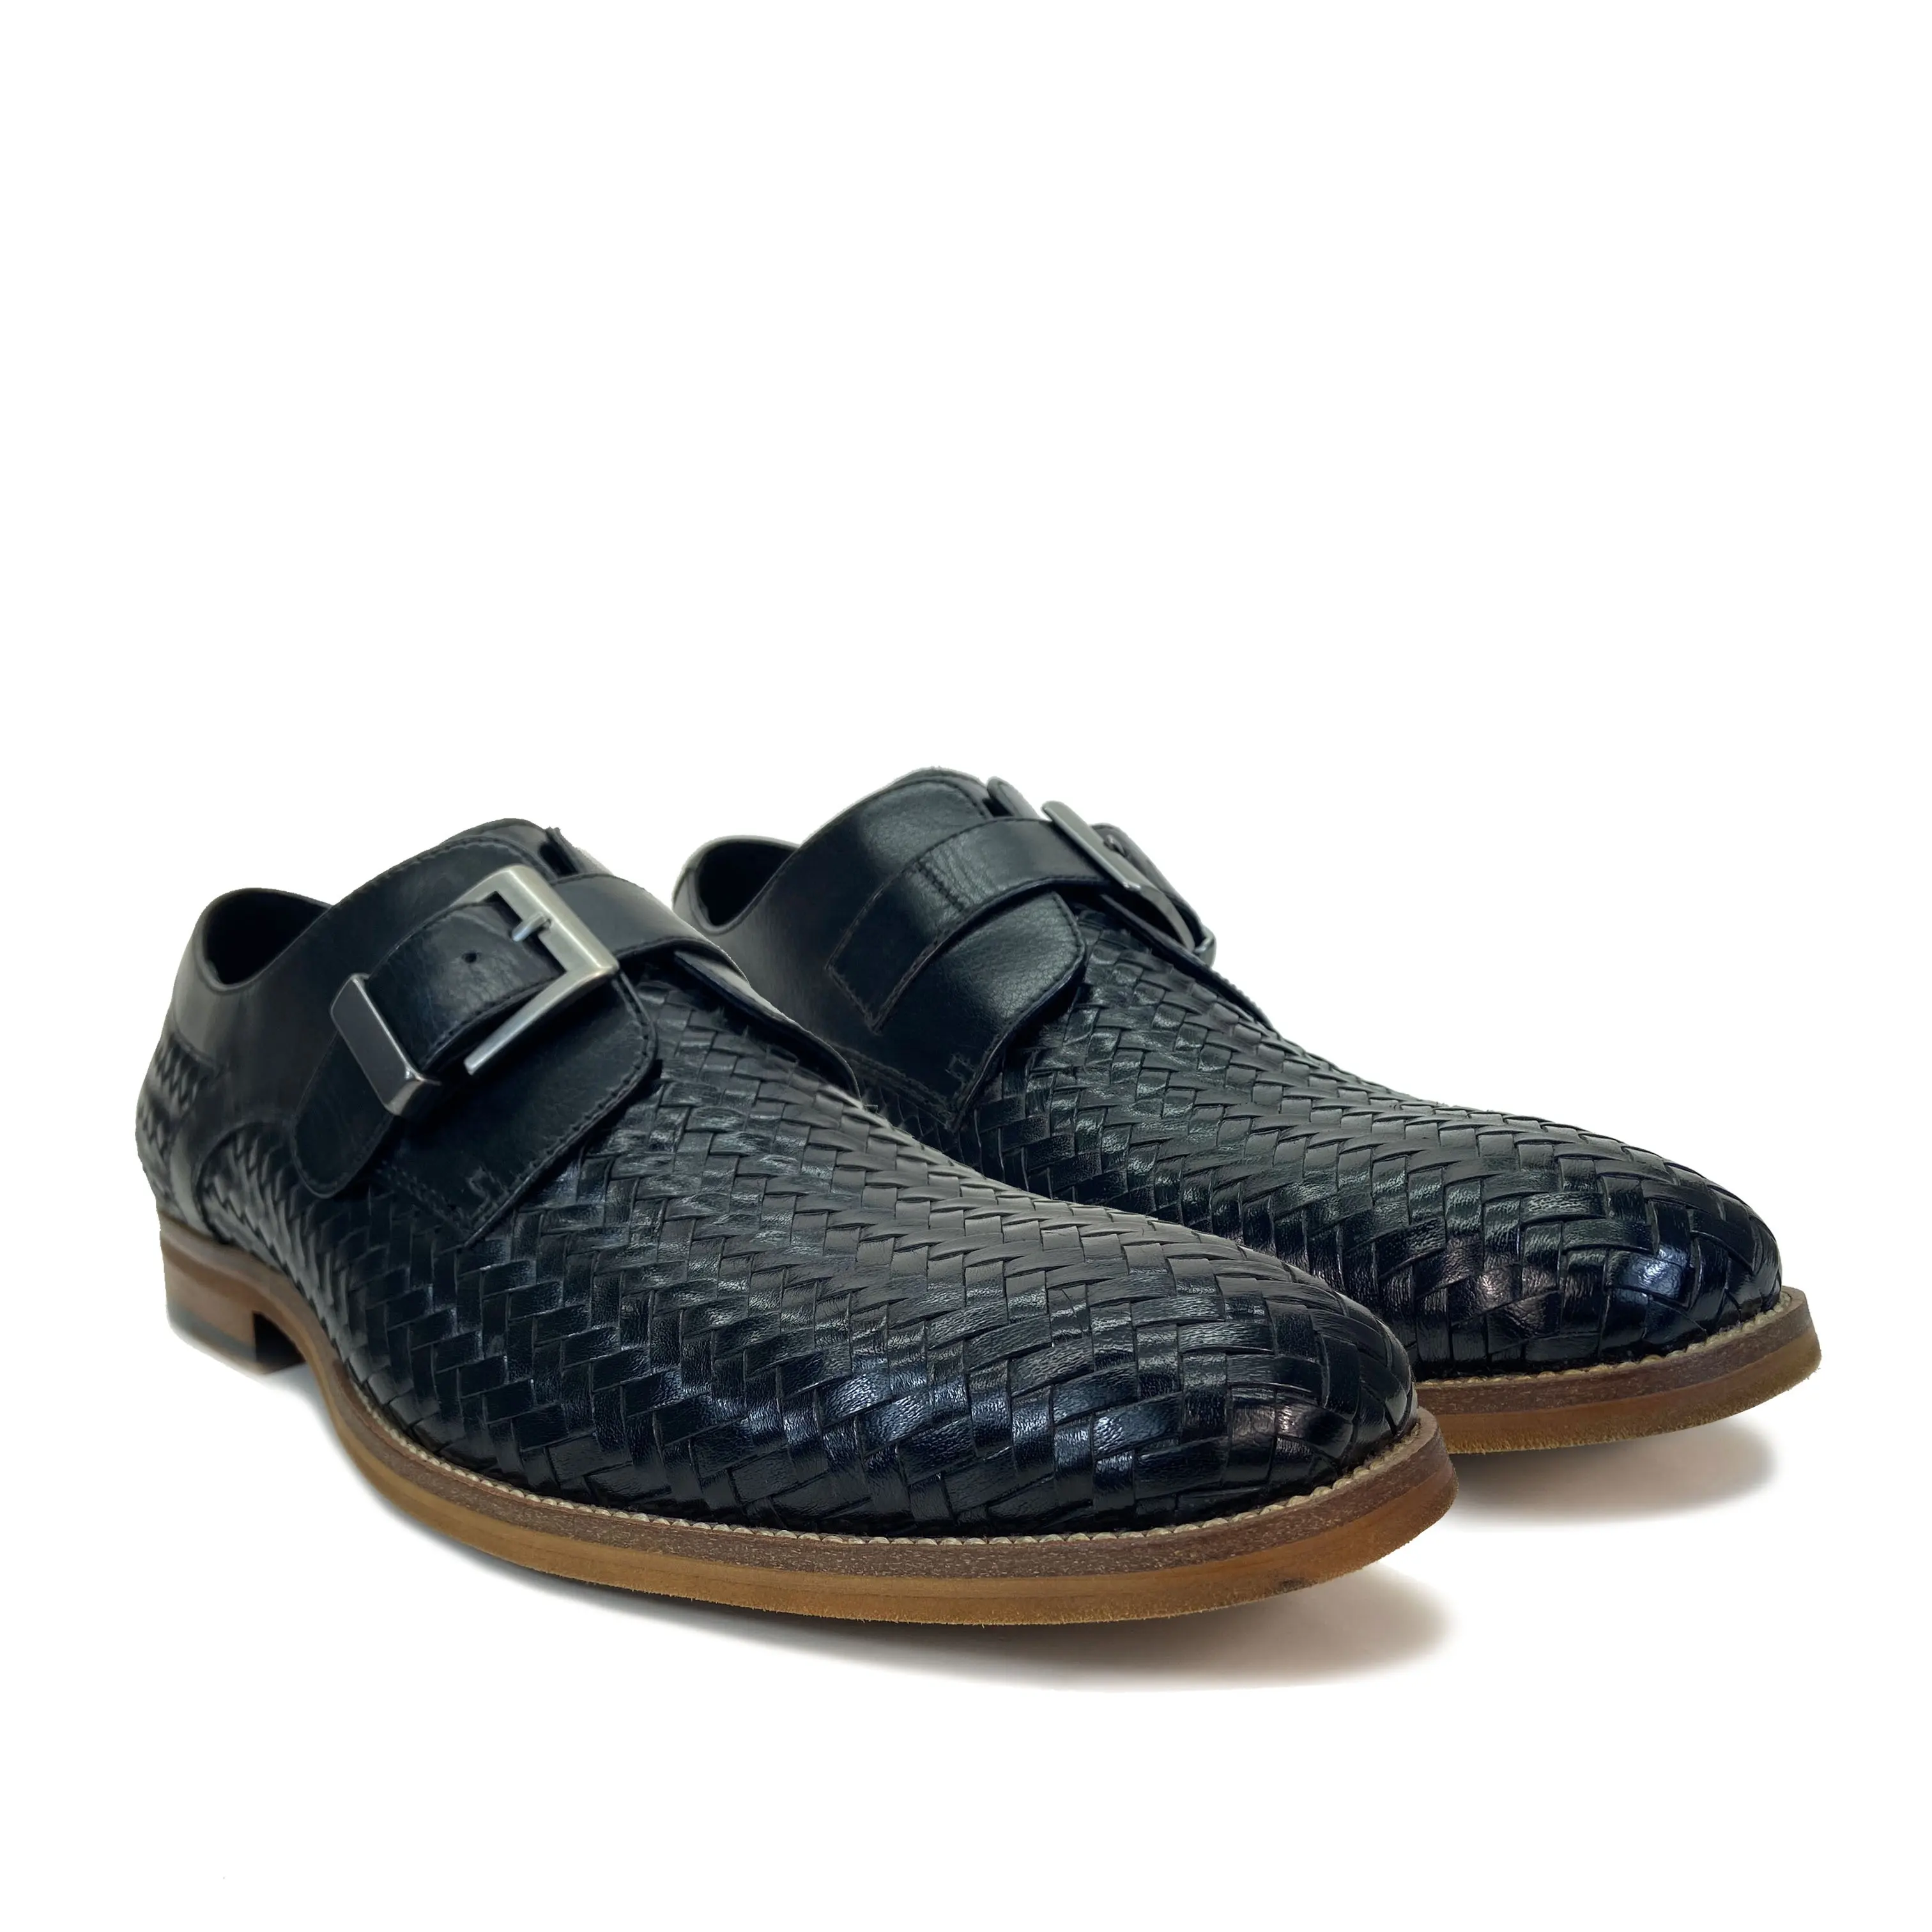 <span class=keywords><strong>Chaussures</strong></span> de travail <span class=keywords><strong>en</strong></span> <span class=keywords><strong>cuir</strong></span> brunes pour hommes, nouvelle Collection, prix usine, <span class=keywords><strong>chaussures</strong></span> décontractées, tricot <span class=keywords><strong>bruni</strong></span>, noires, avec boucle, Collection